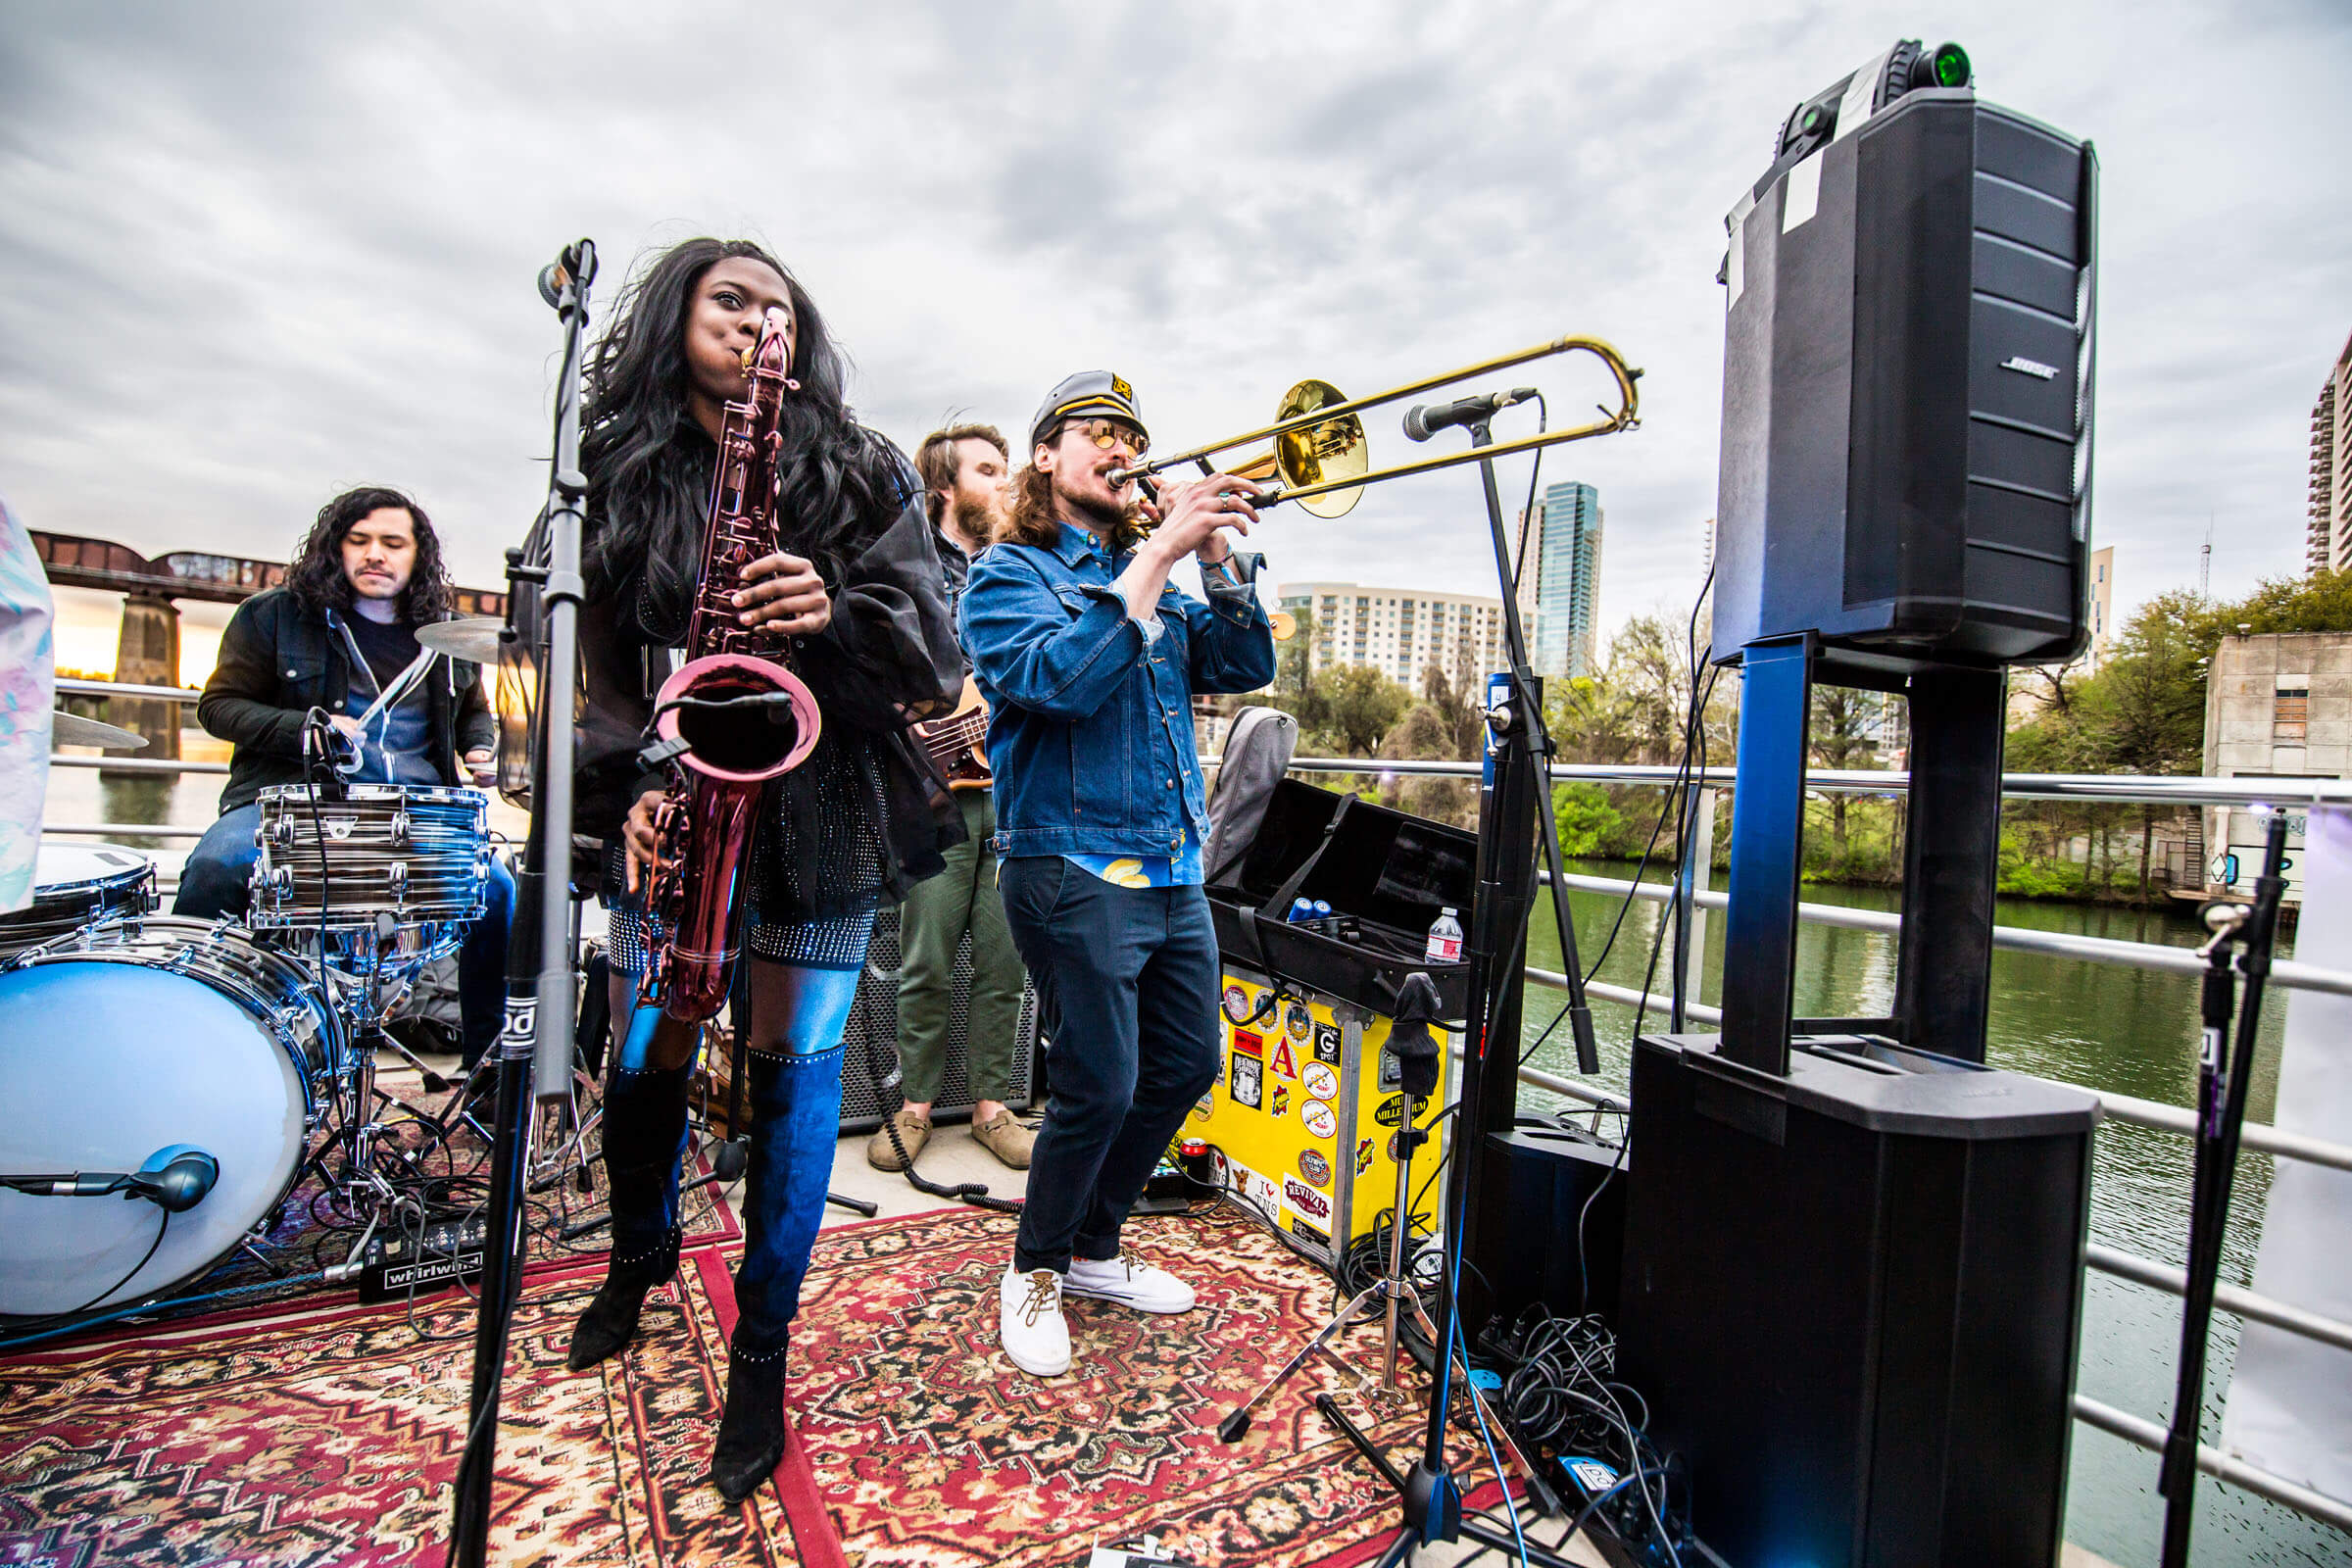 New Nashville Live Riverboat Showcase During SXSW 2019 Employs Bose Portable Sound Systems – rAVe [PUBS]